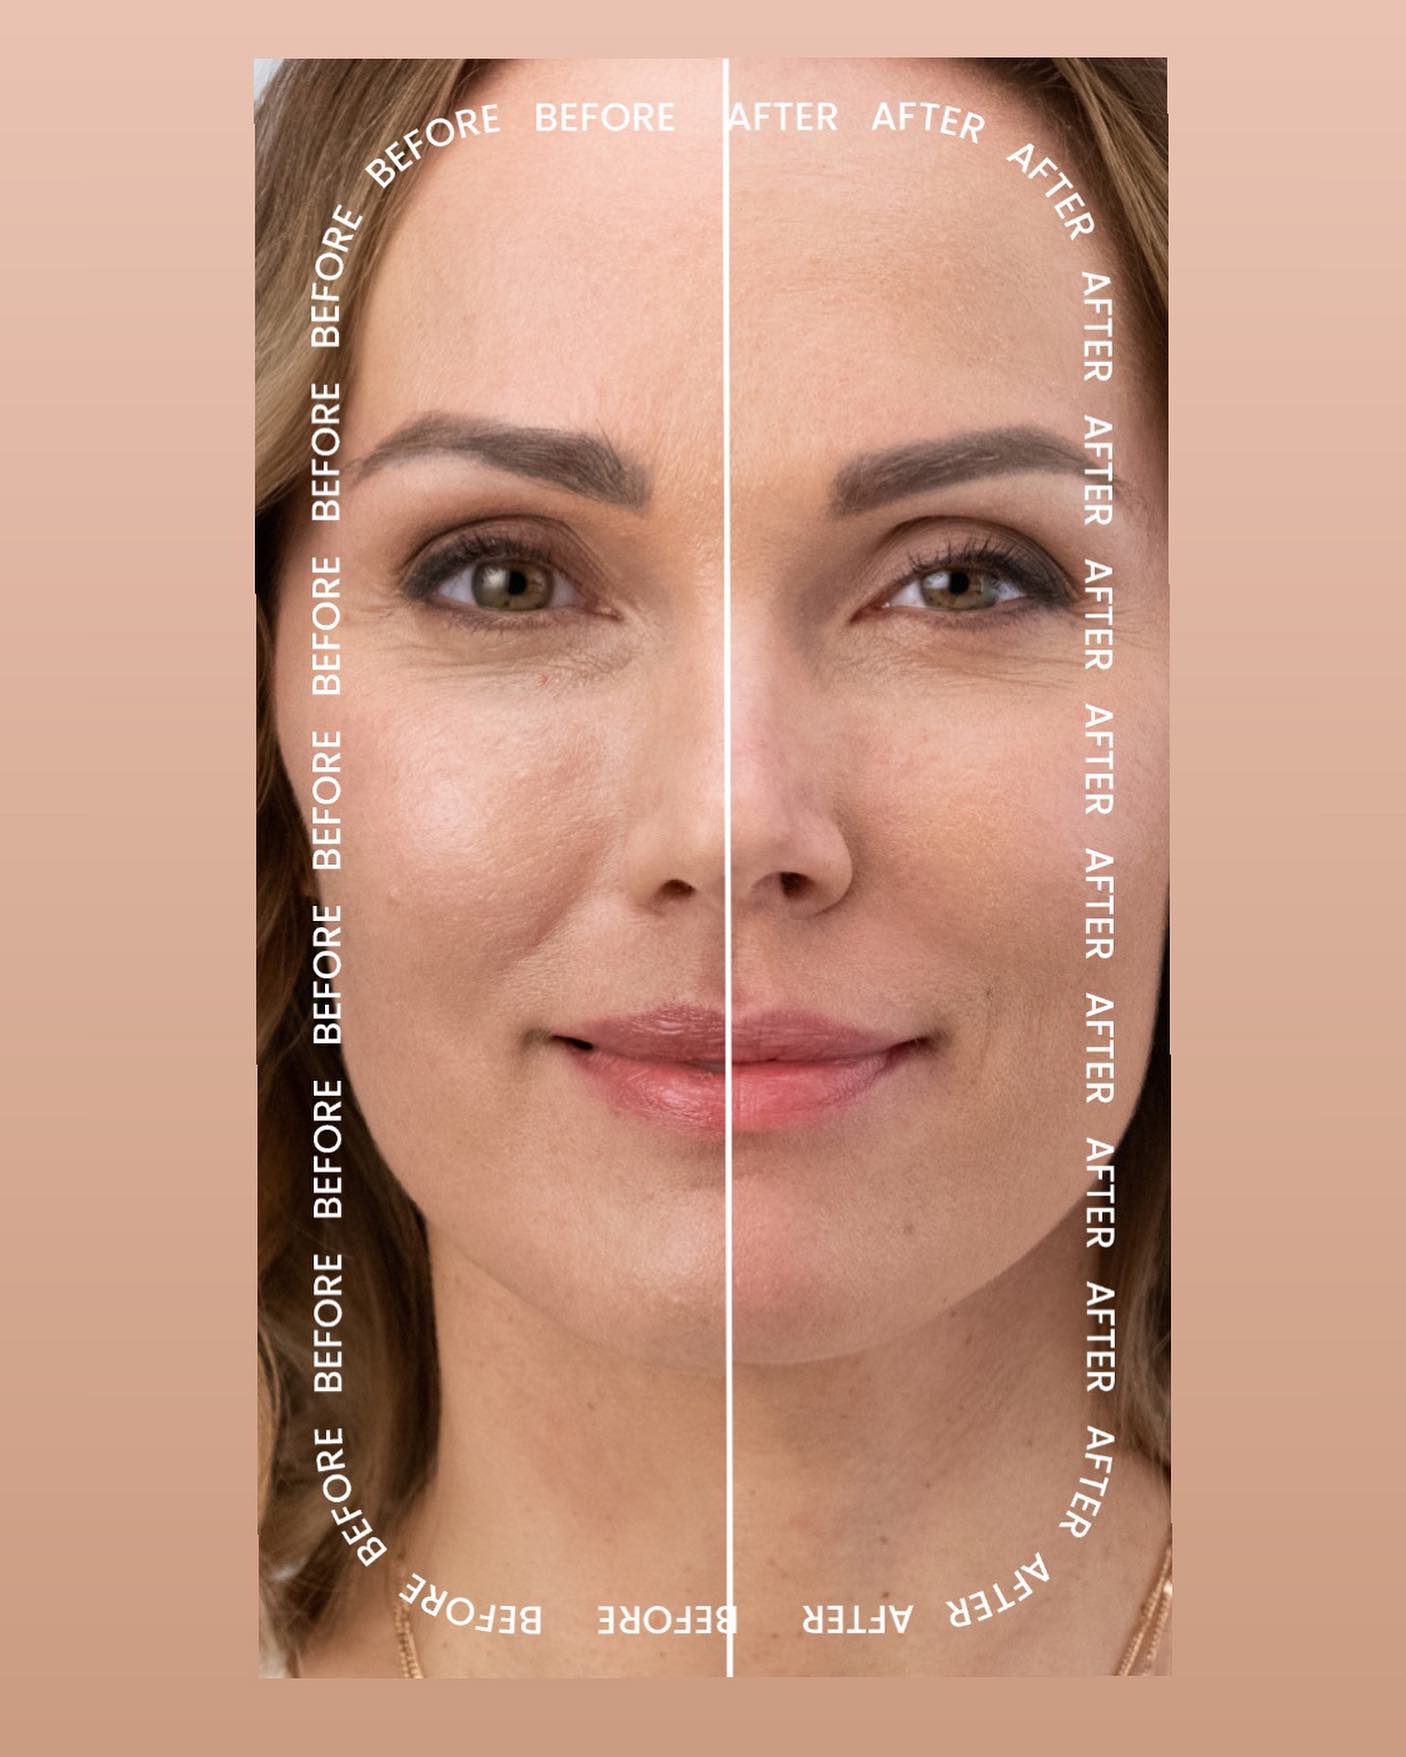 Have you tried #rhafiller ?

Expertly designed to add natural looking volume to dynamic wrinkles and folds, RHA 4 is made for results that look beautiful at rest and flawless in motion. Interested in learning more call and book with Christine - 443-388-2225

.
.
#rhacollection  #designerfiller #hafiller #rha4filler #cosmeticloungemd #ellicottcitymd